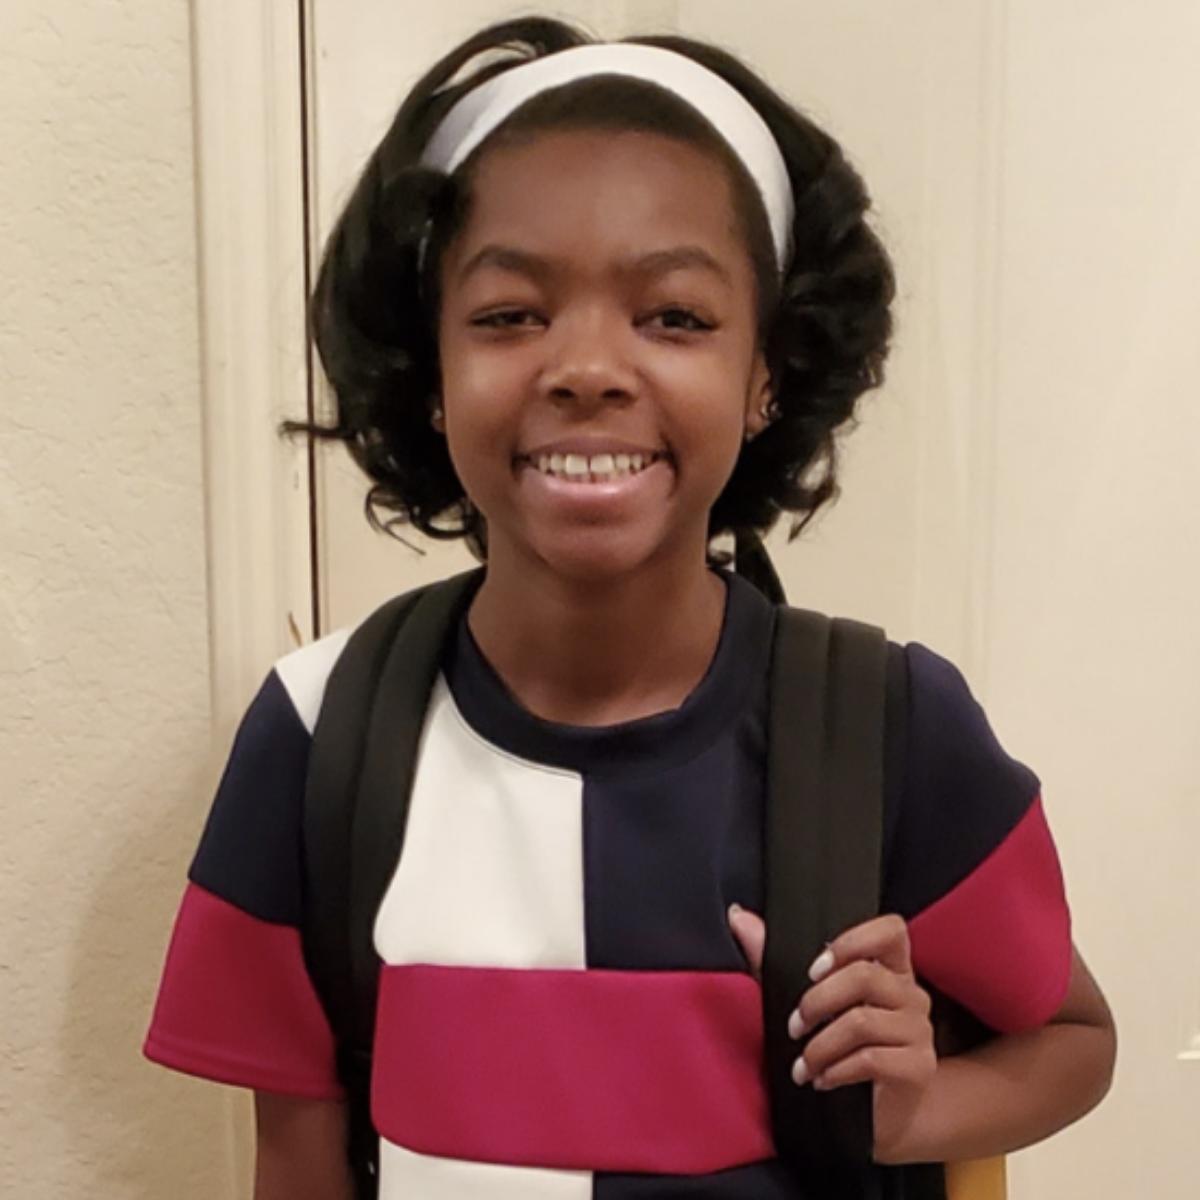 Texas 11-Year-Old Girl Just Completed Her First Day Of High School